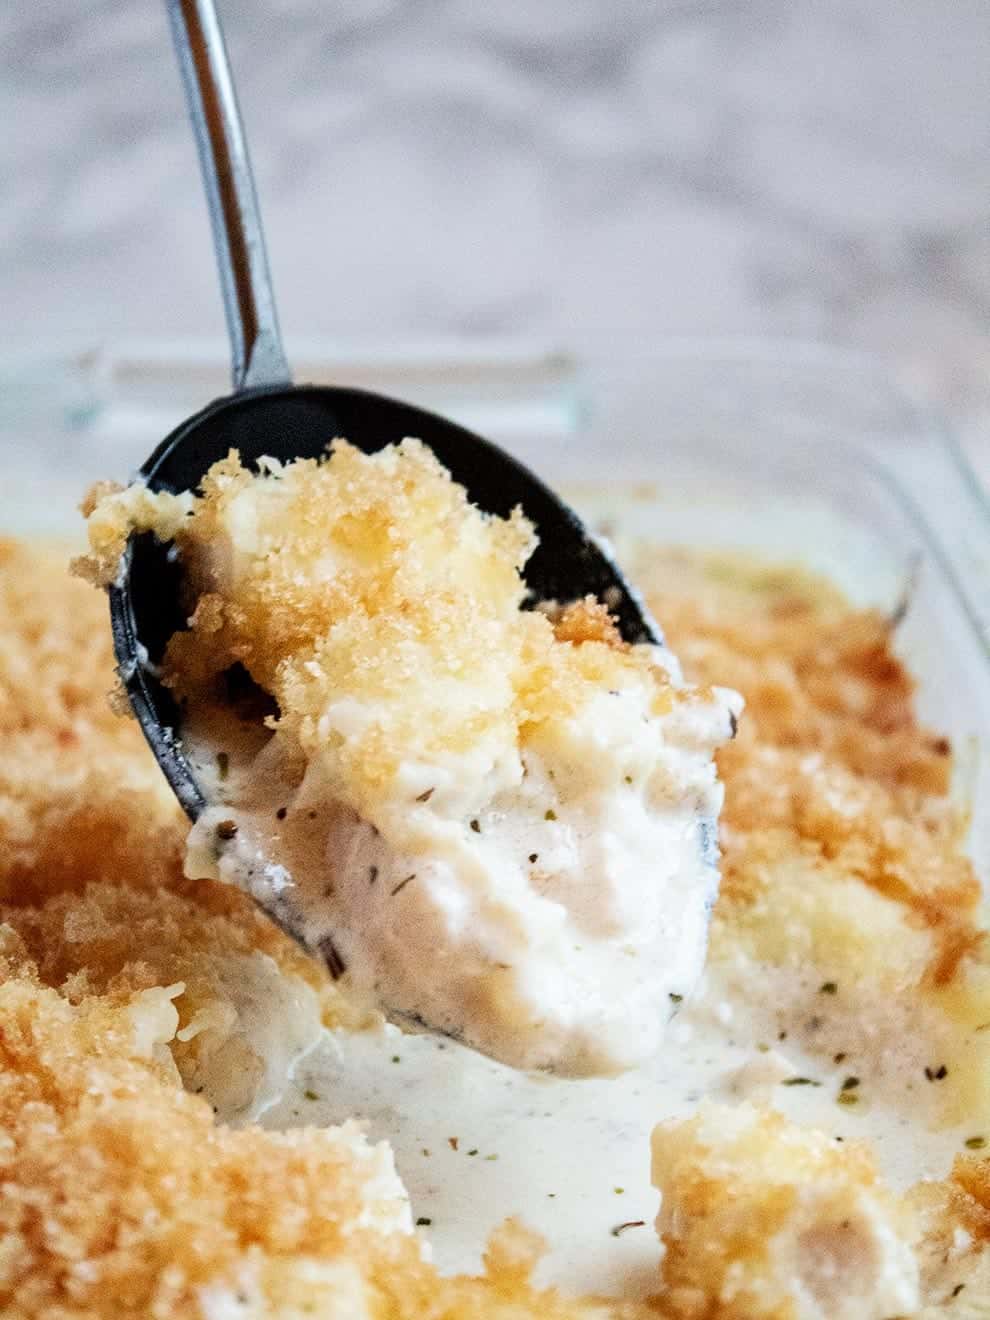 keto chicken alfredo casserole with a large black spoon dipped into the dish